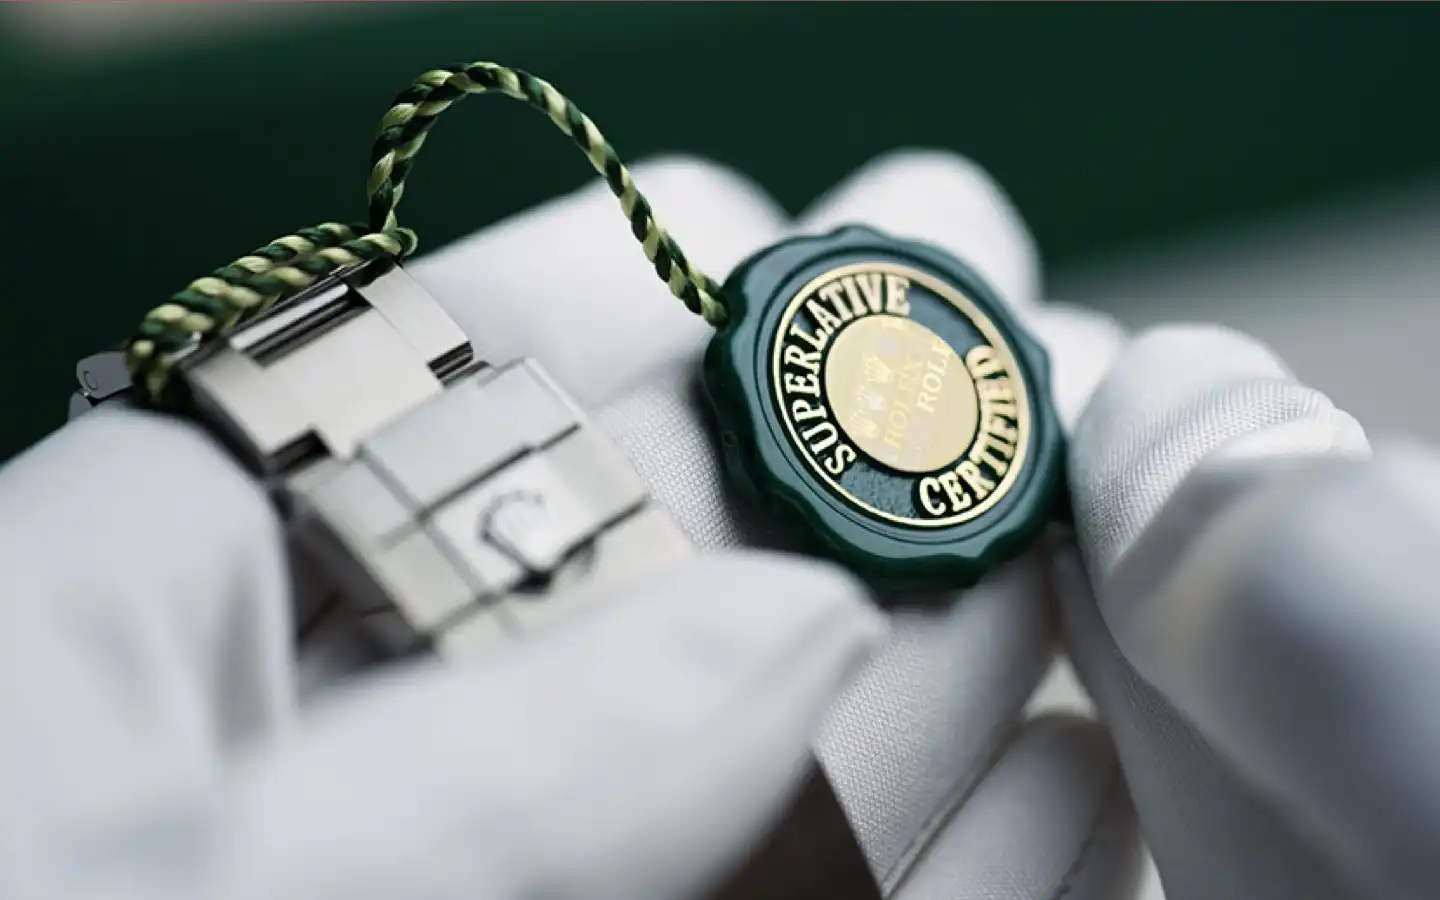 ROLEX WATCHMAKING - MORE THAN A CERTIFICATION, A STATE OF MIND